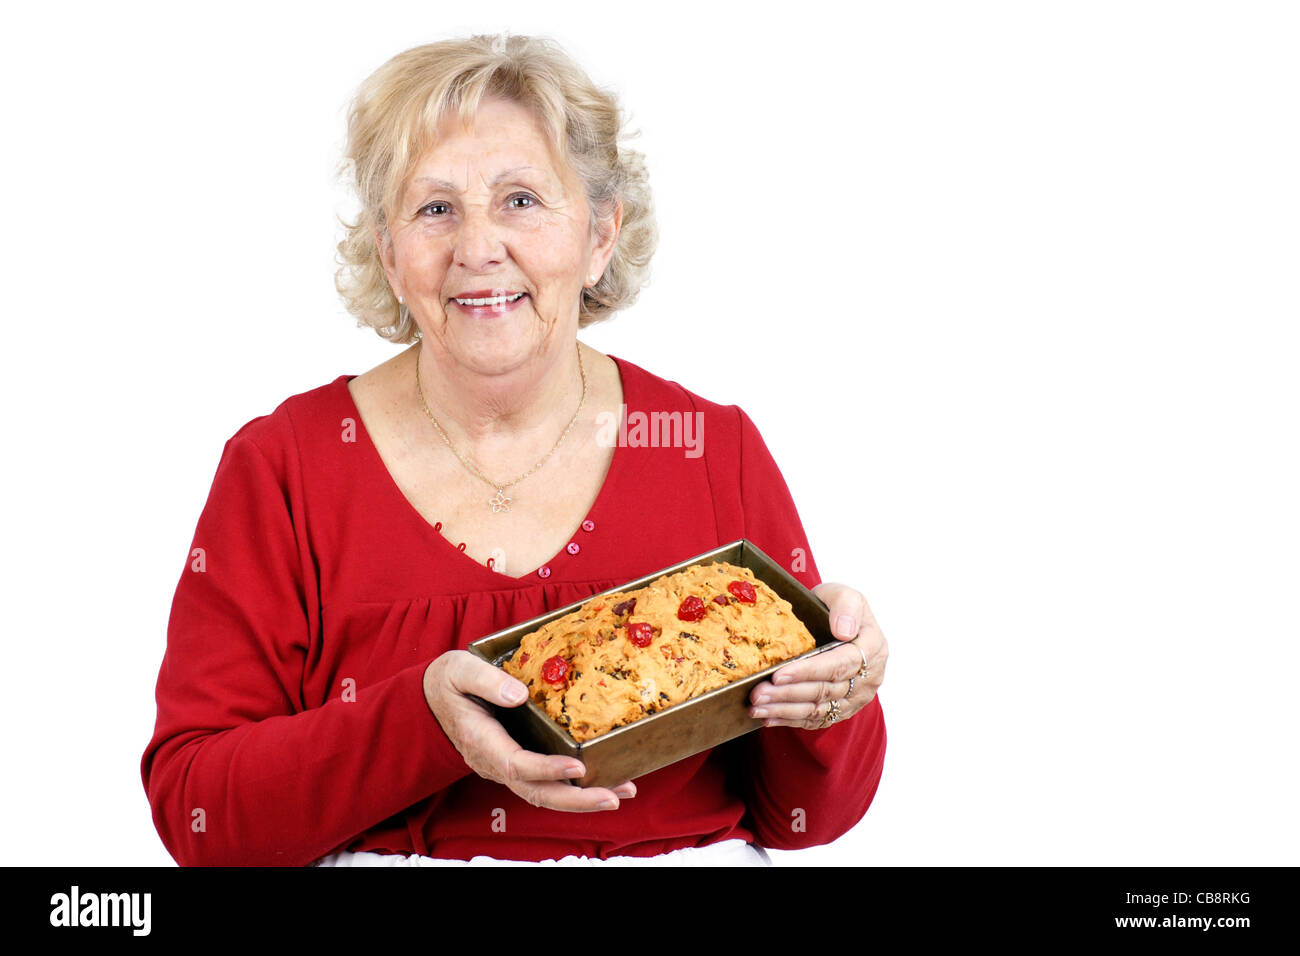 Mother and grand-mother welcoming her family with a smile and a freshly baked home made fruit cake. Stock Photo